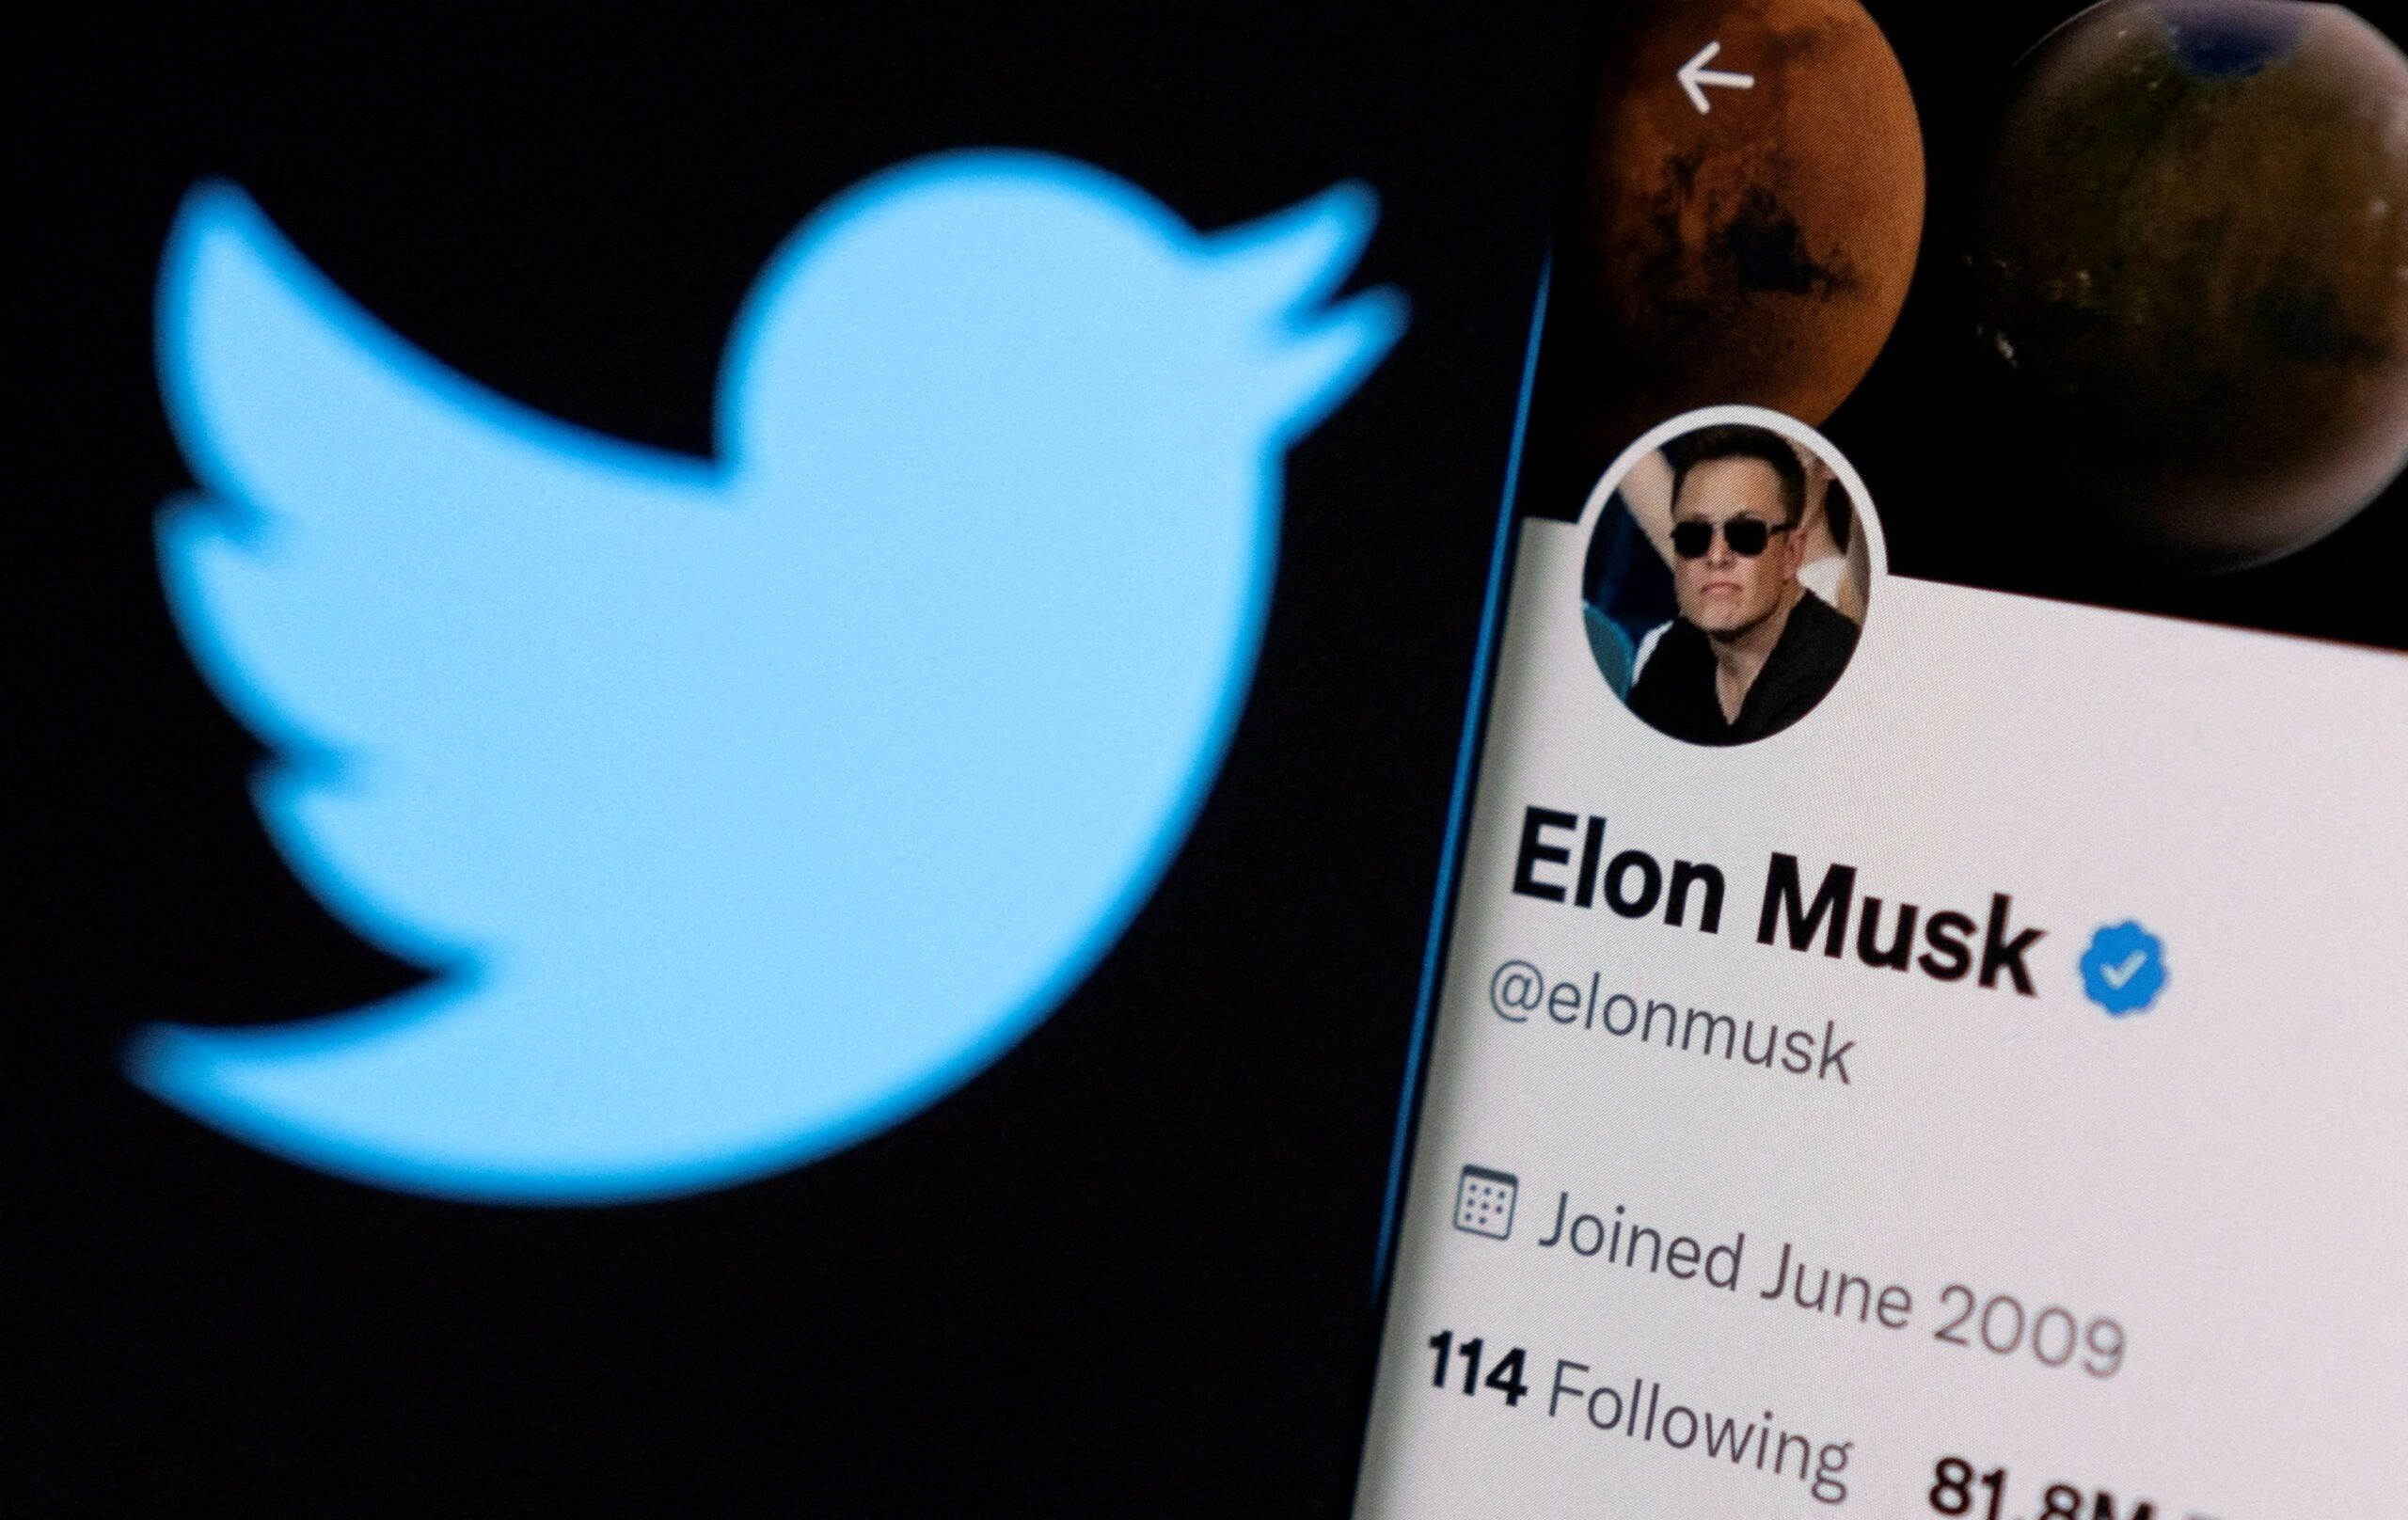 Musk seeks to put in less money in new Twitter deal financing – sources